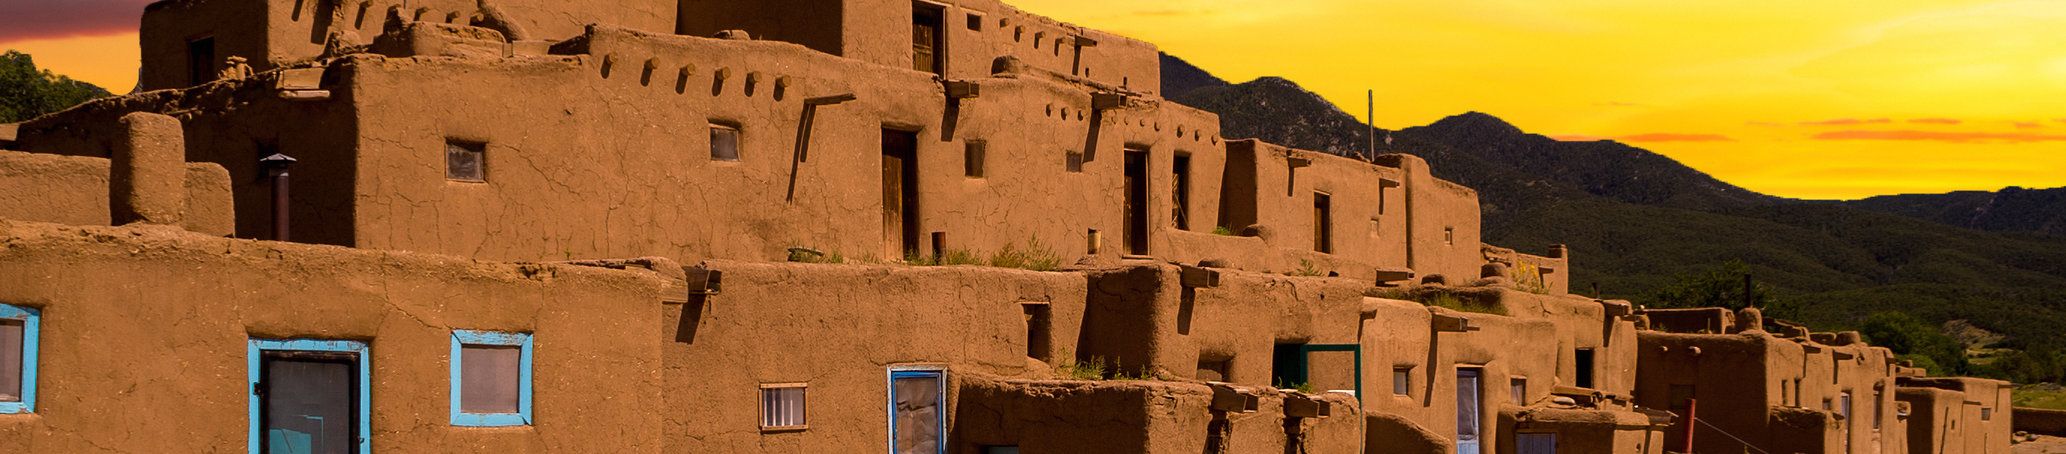 Ancient City of Taos, New Mexico